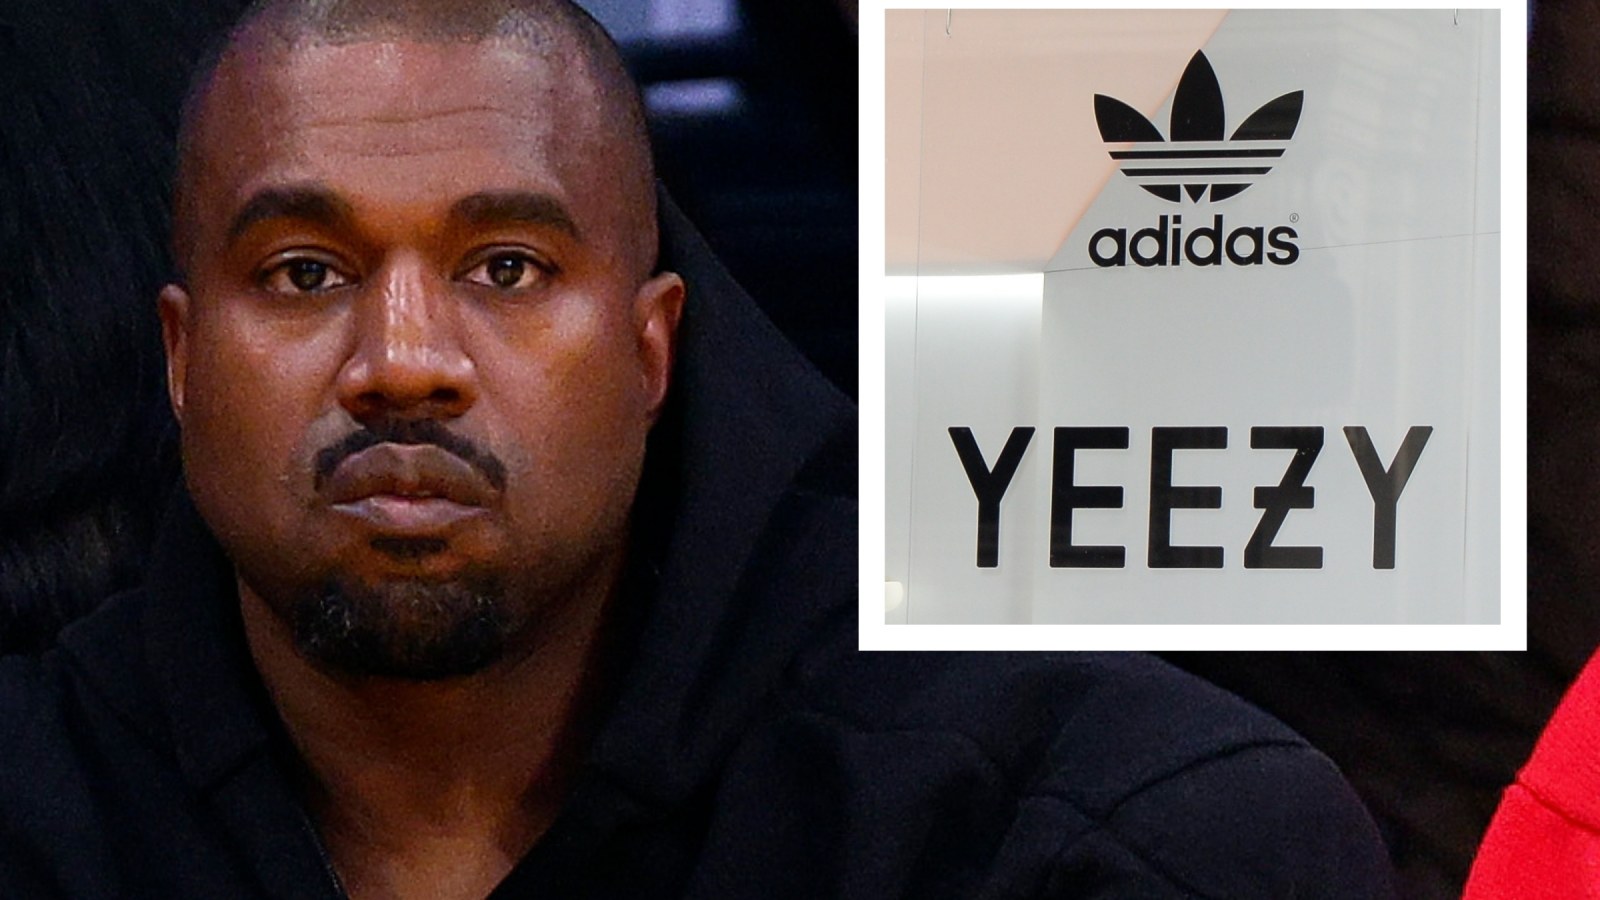 død Demokrati enestående What's Next for Kanye West's Yeezy Brand as Adidas Copyright Feud Continues